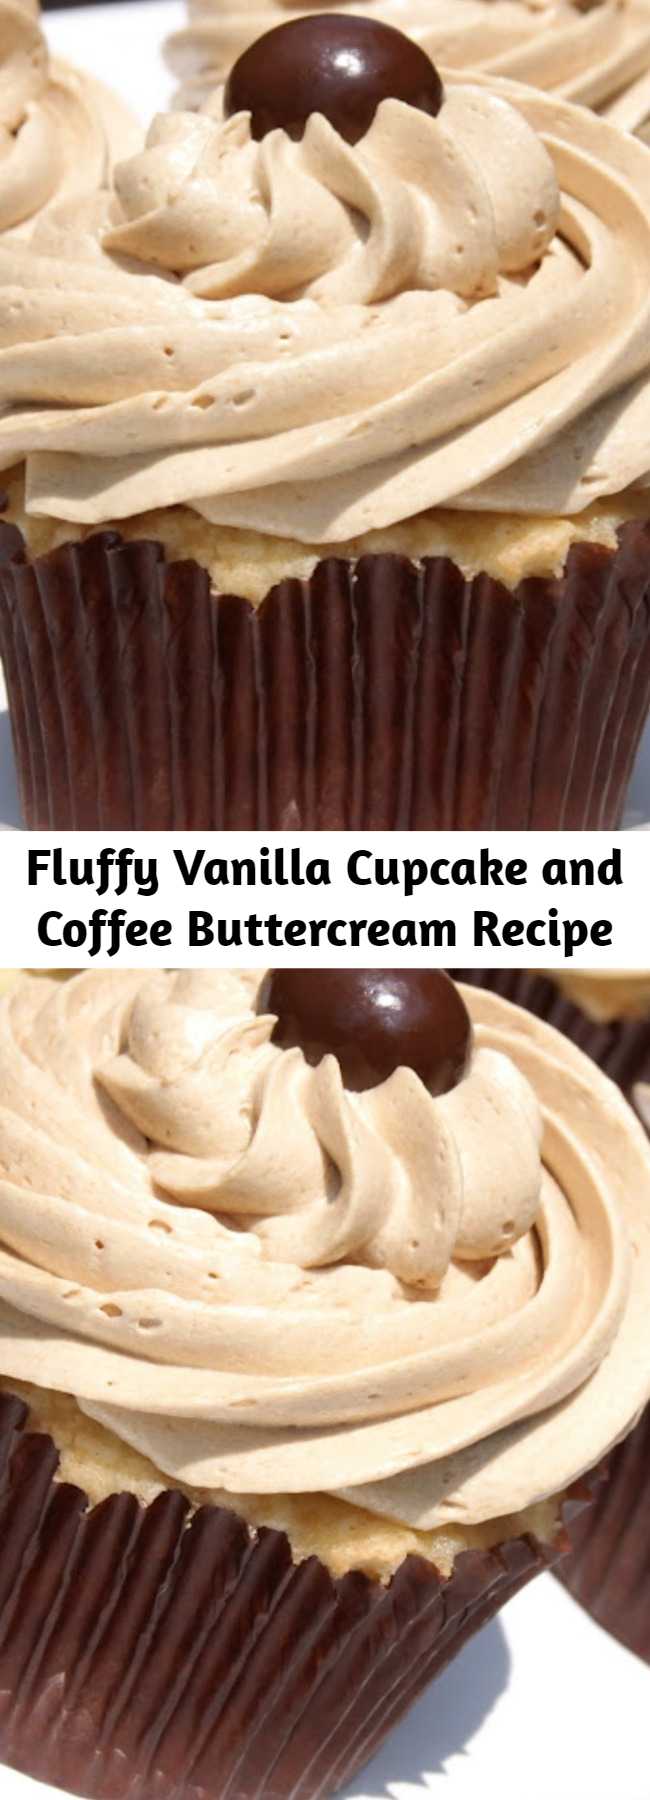 Fluffy Vanilla Cupcake and Coffee Buttercream Recipe - Fluffy & delicious ~ These are truly the BEST vanilla cupcakes with the BEST coffee buttercream frosting. A double sweet treat, for sure!